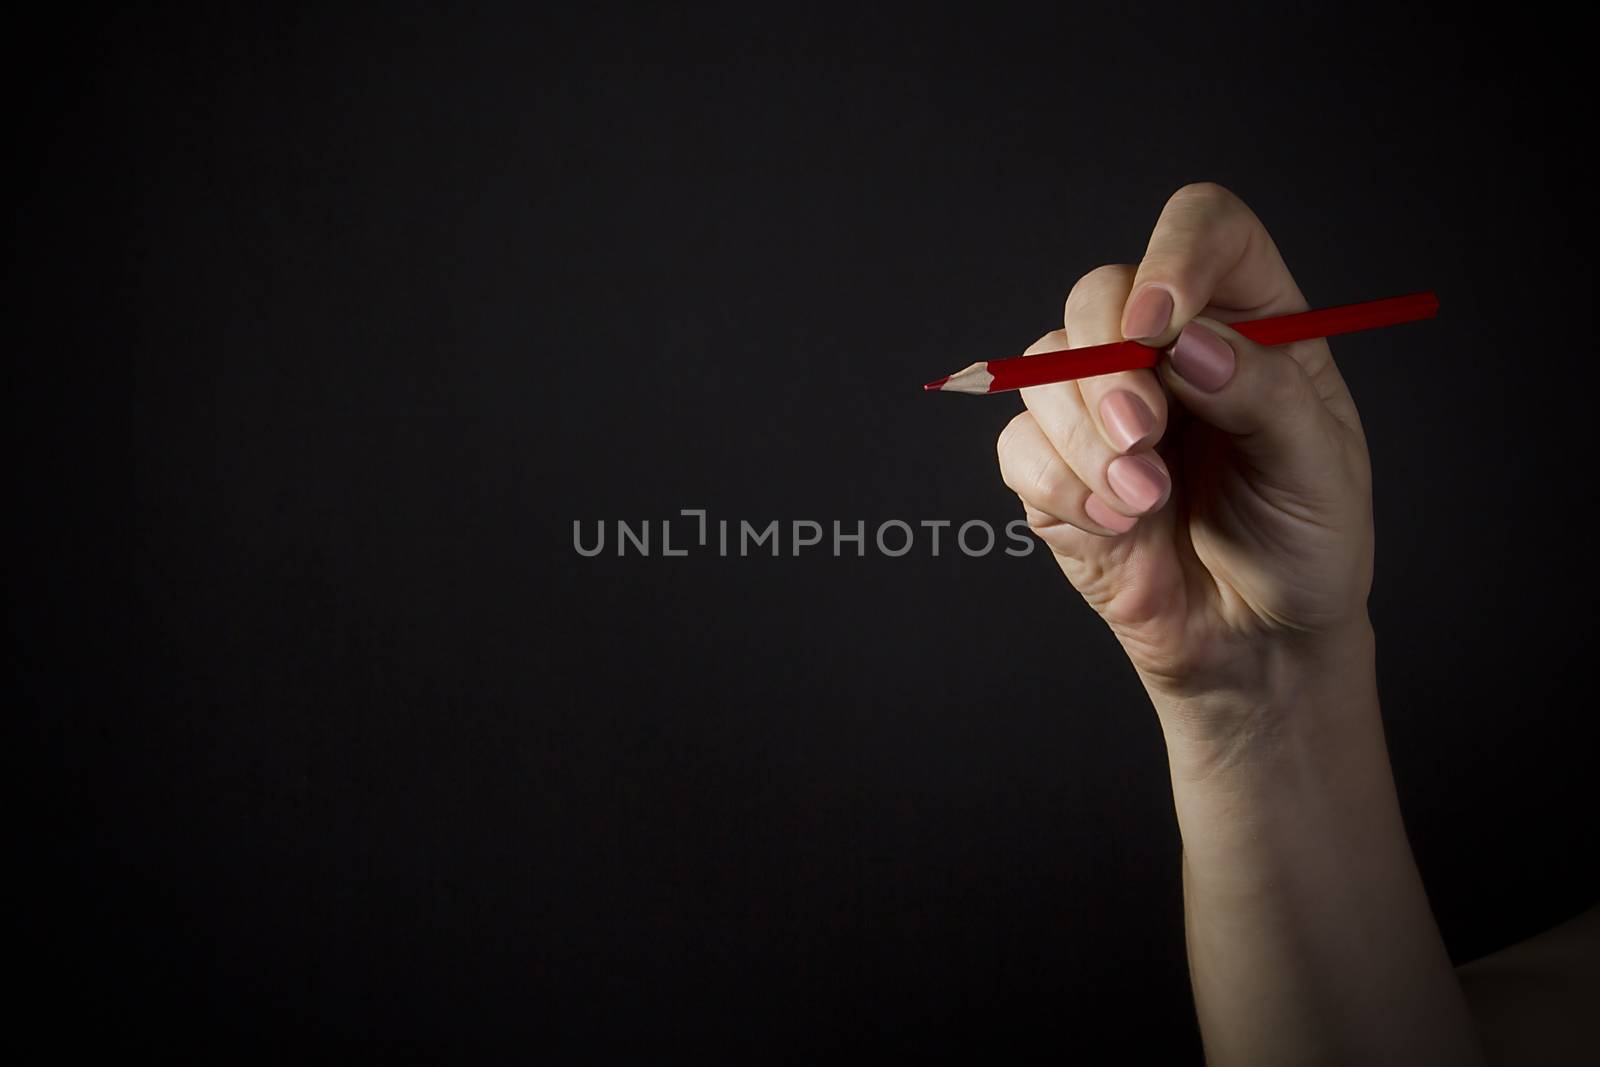 Female hand with a red pencil on a black background